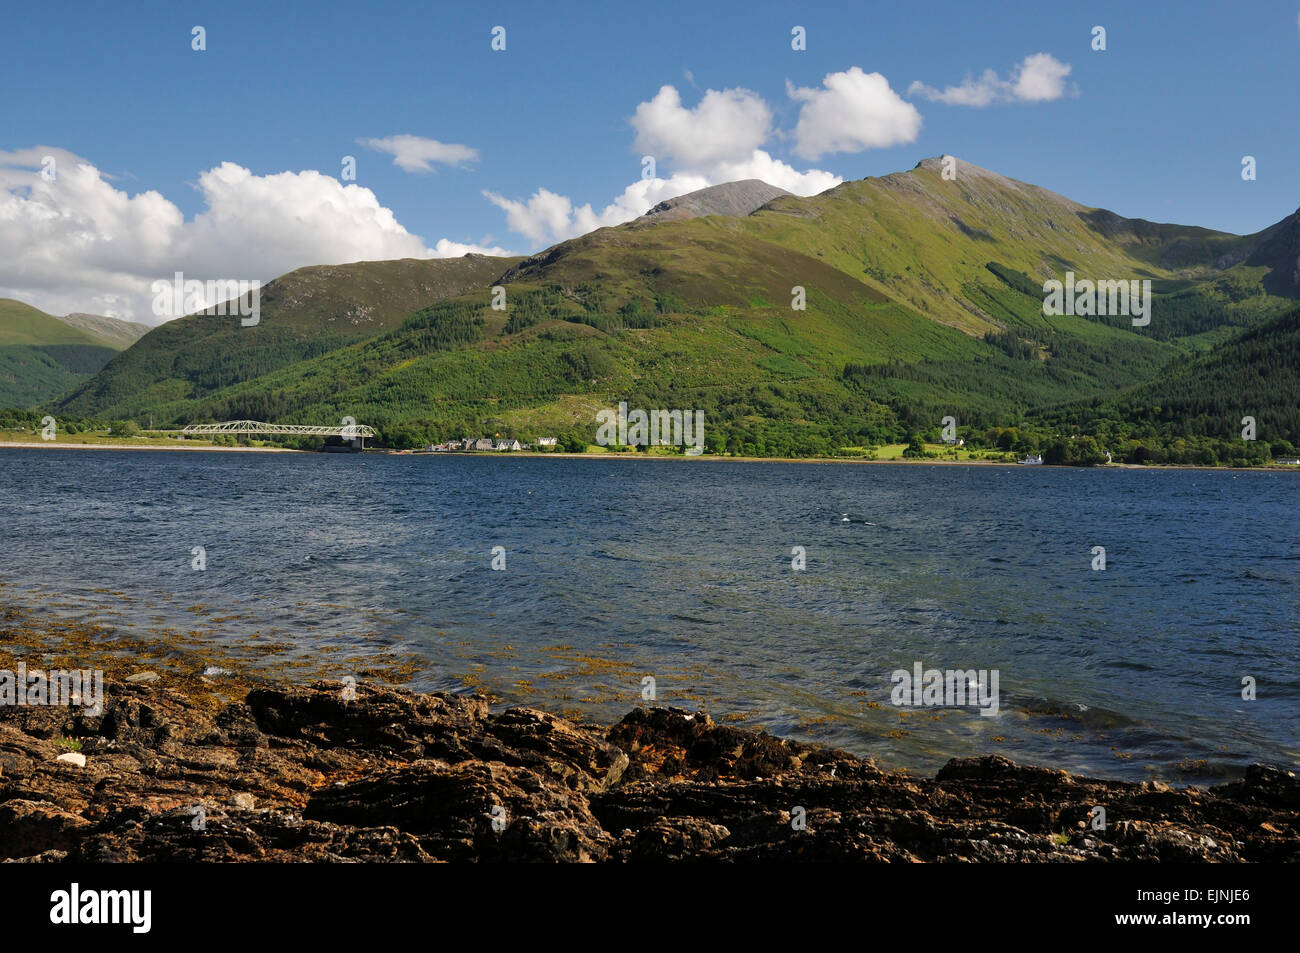 Loch Linnhe, Ballachulish Bridge & mountains of Sgorr Dhearg viewed from Onich Stock Photo